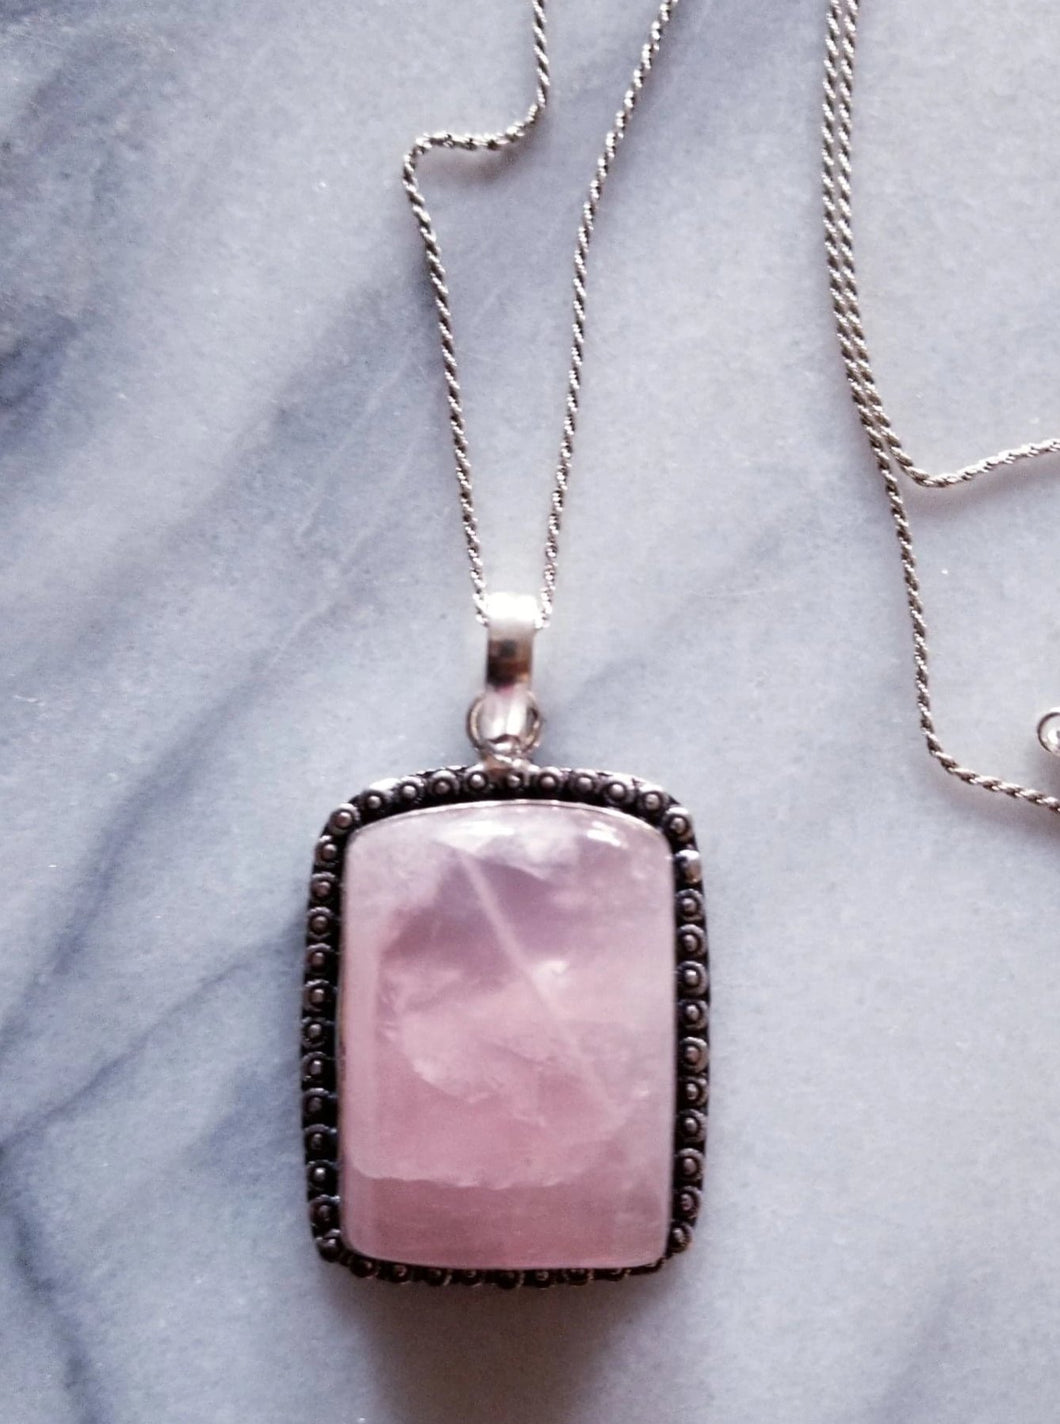 Rose Quartz Necklace with Sterling Silver Chain